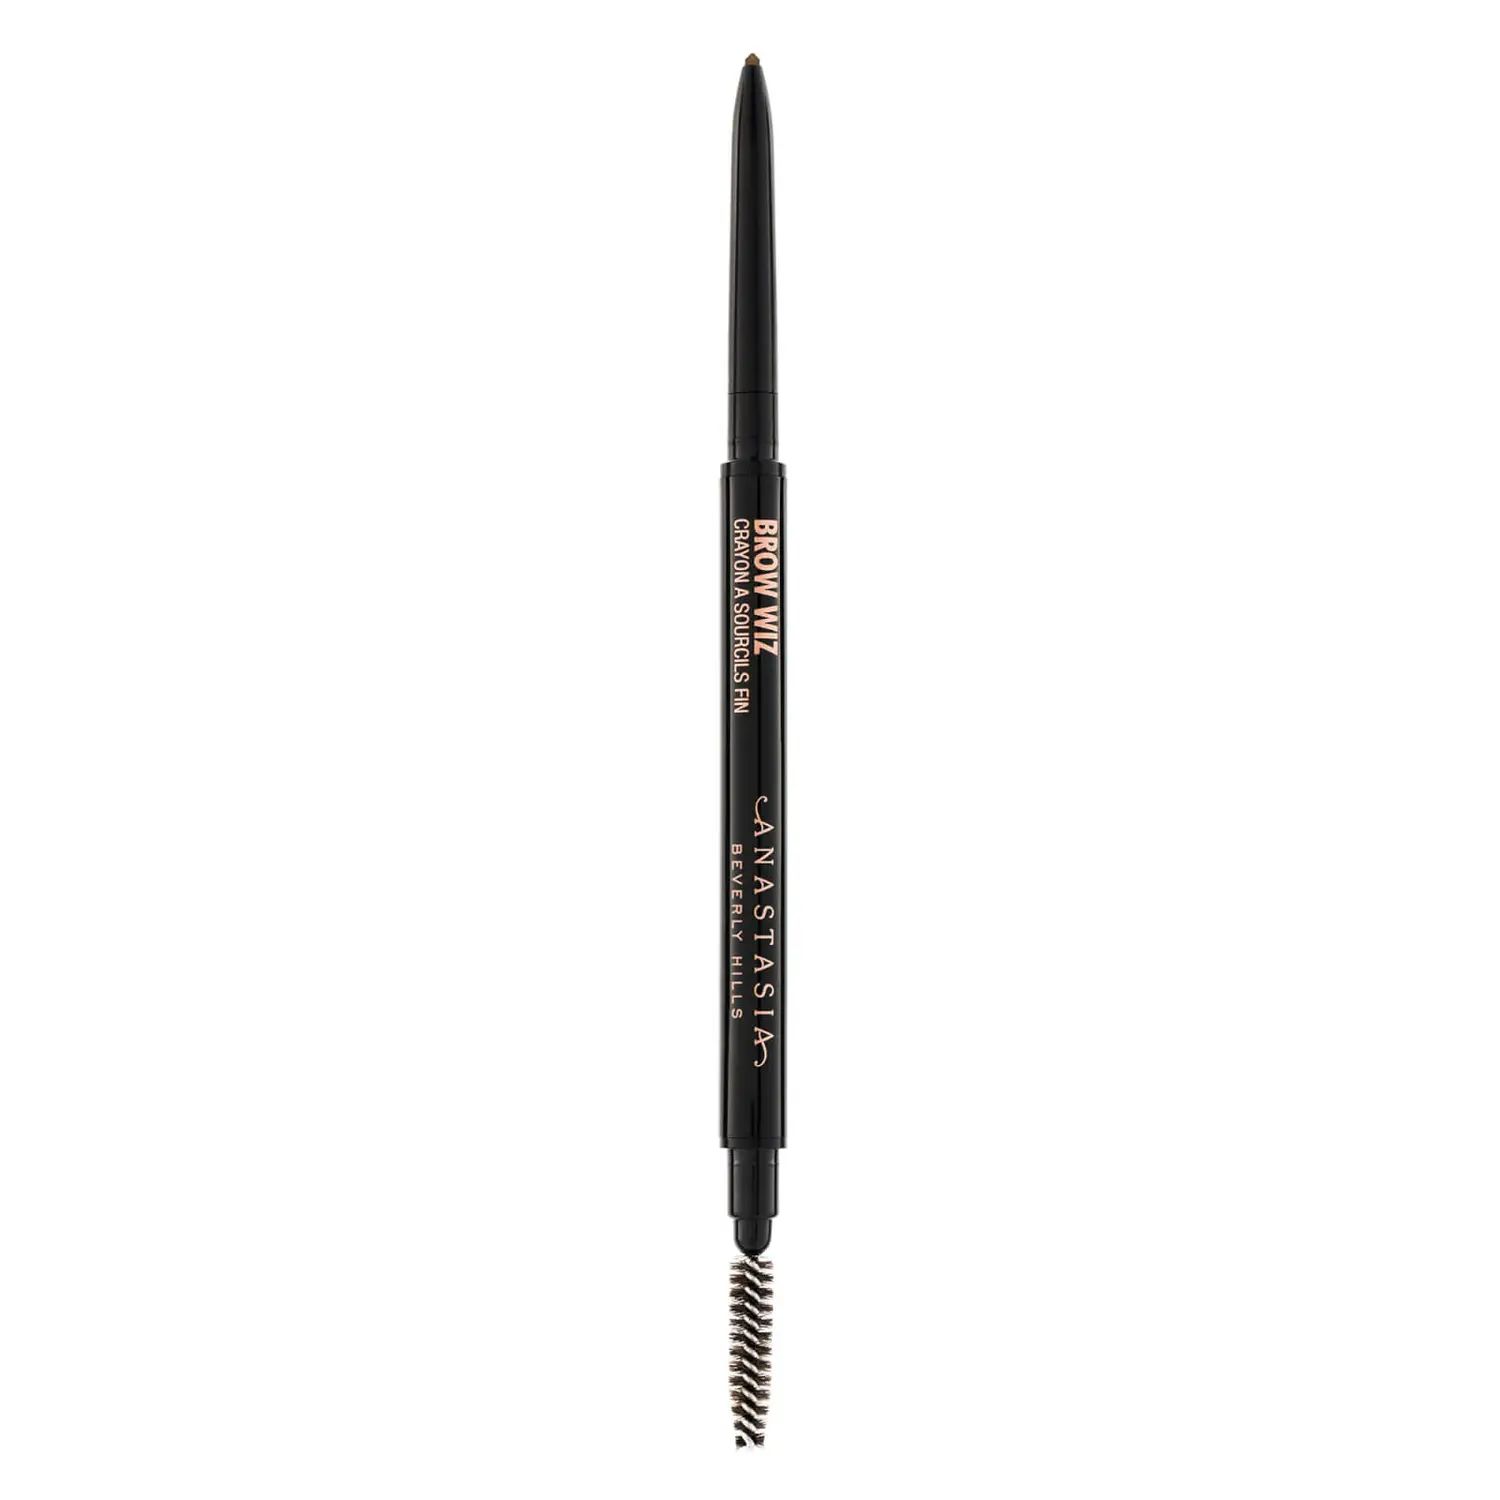 Anastasia Beverly Hills Brow Wiz 0.08g (Various Shades) | Cult Beauty